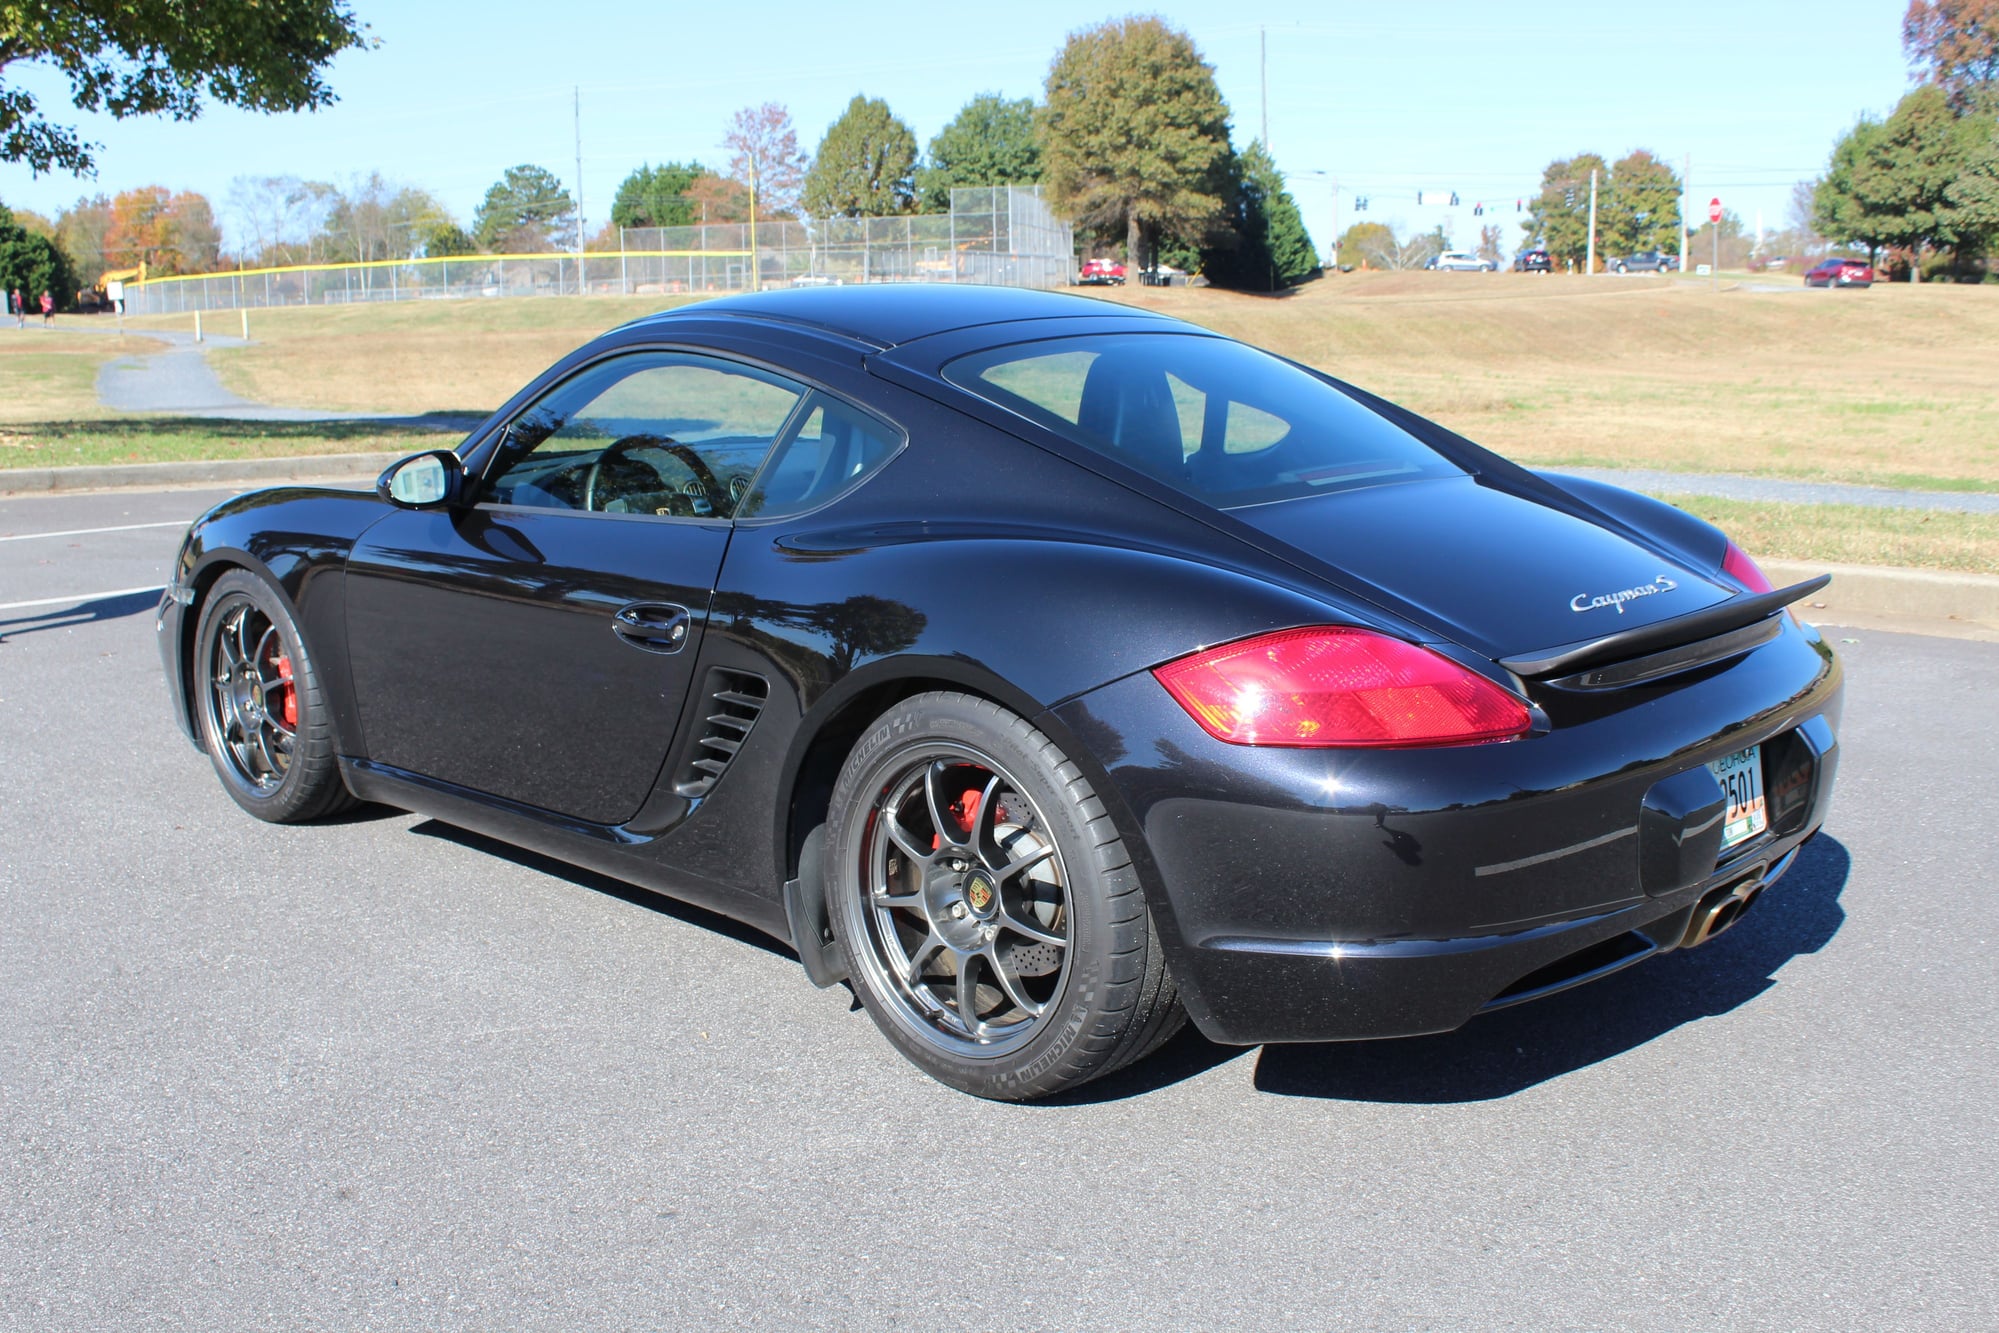 2006 Porsche Cayman - 2006 Cayman S, low miles and upgraded but never tracked! - Used - VIN WP0AB29876U780597 - 32,700 Miles - 6 cyl - 2WD - Manual - Coupe - Black - Roswell, GA 30075, United States